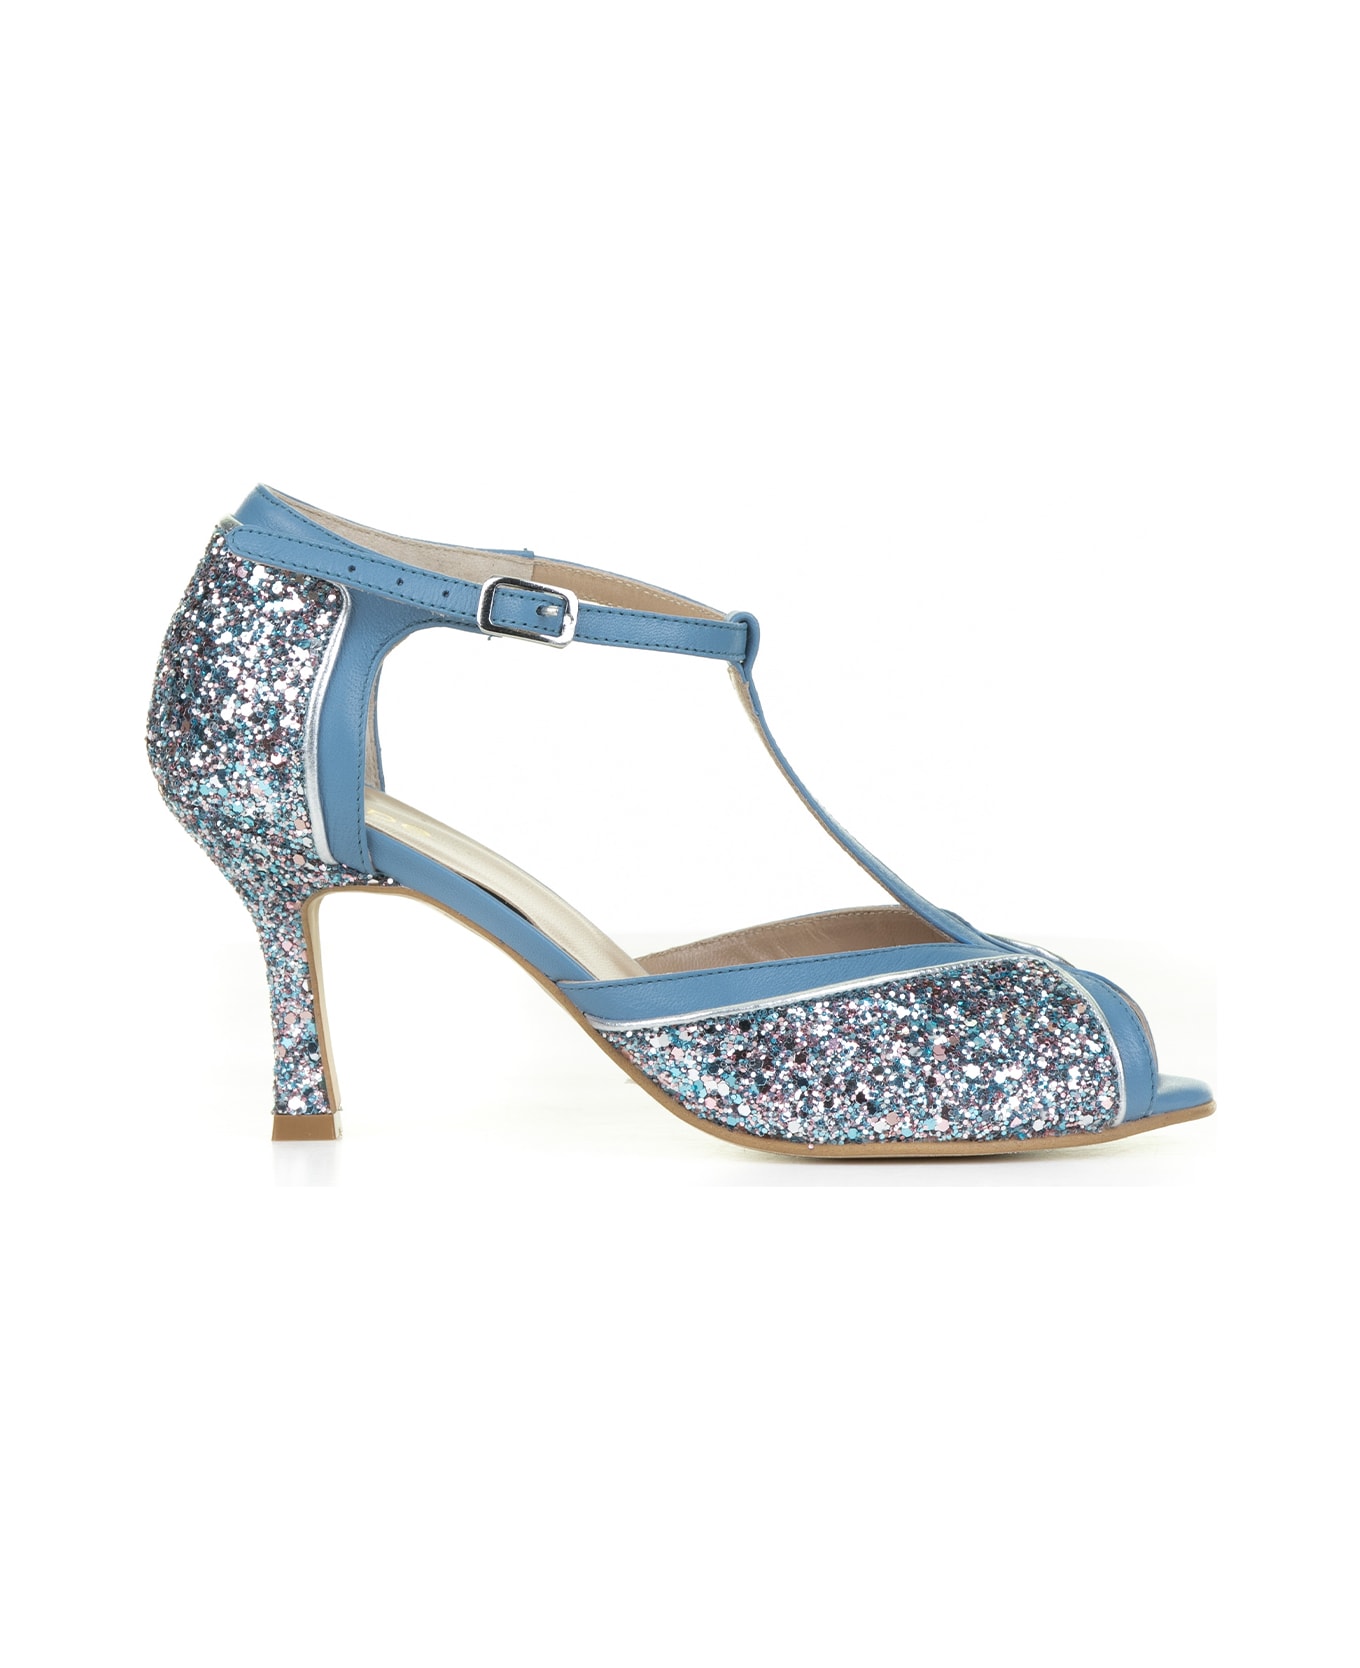 Hope Décolleté In Nappa Leather With Glitter And Strap - AZZURRO ハイヒール